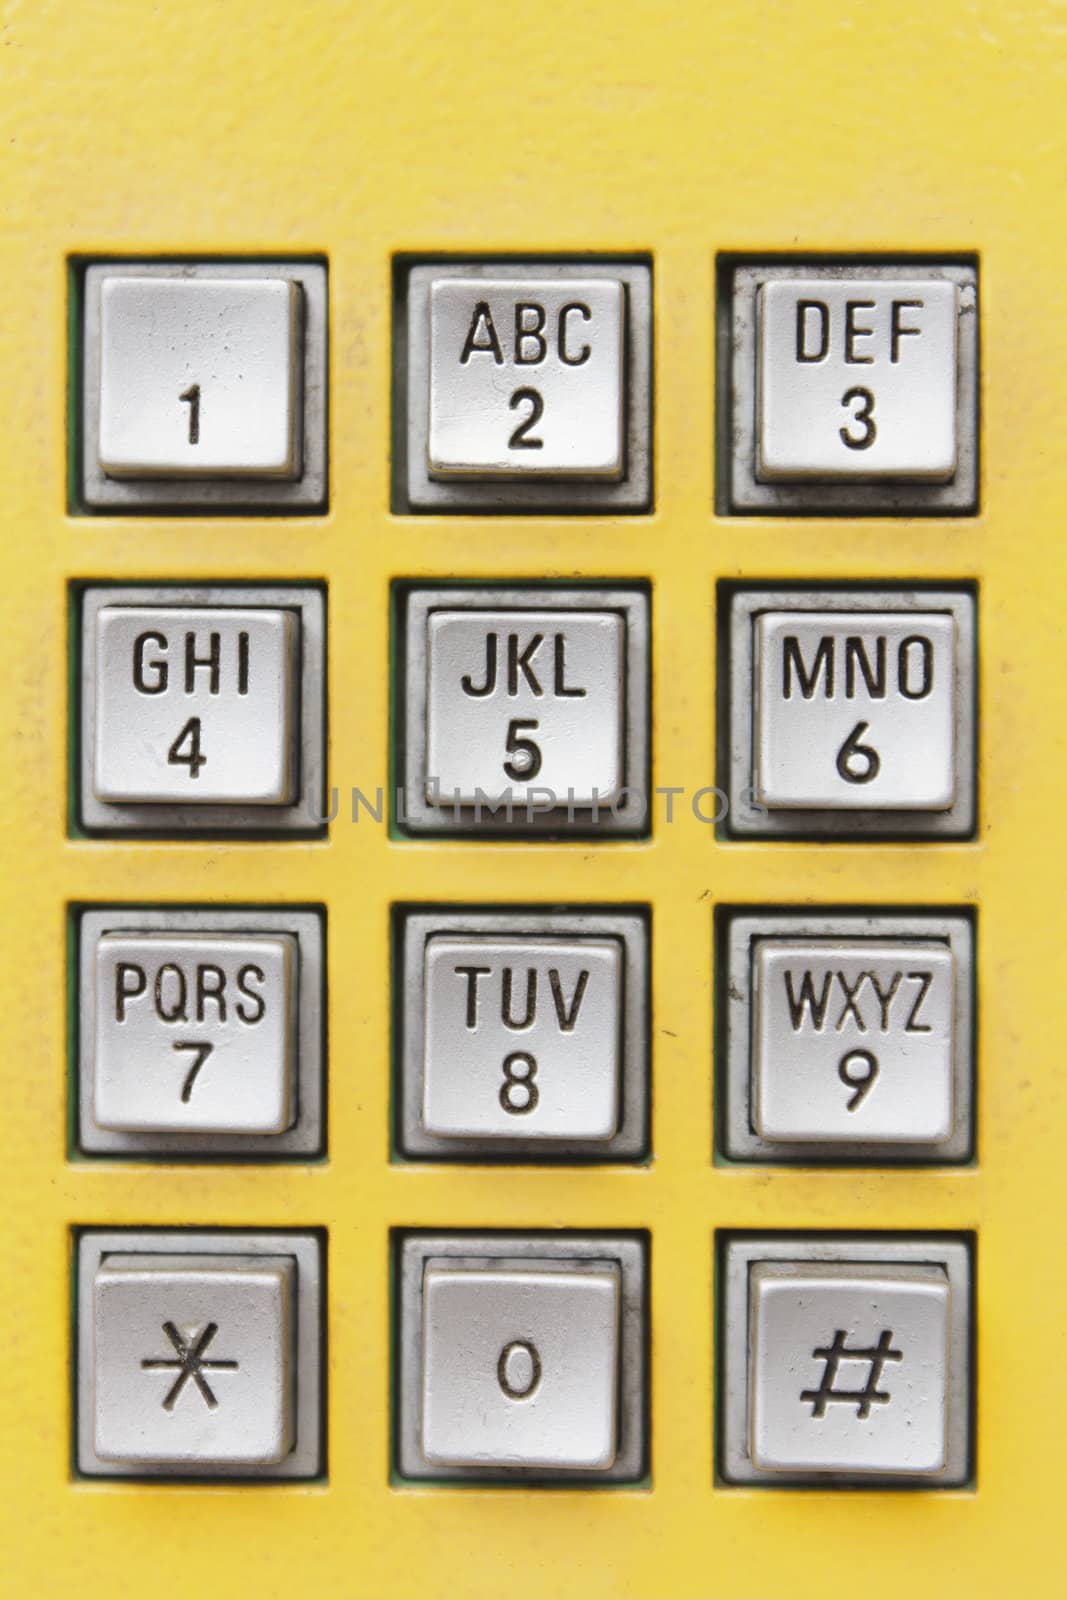 Buttons on yellow public telephone in Thailand